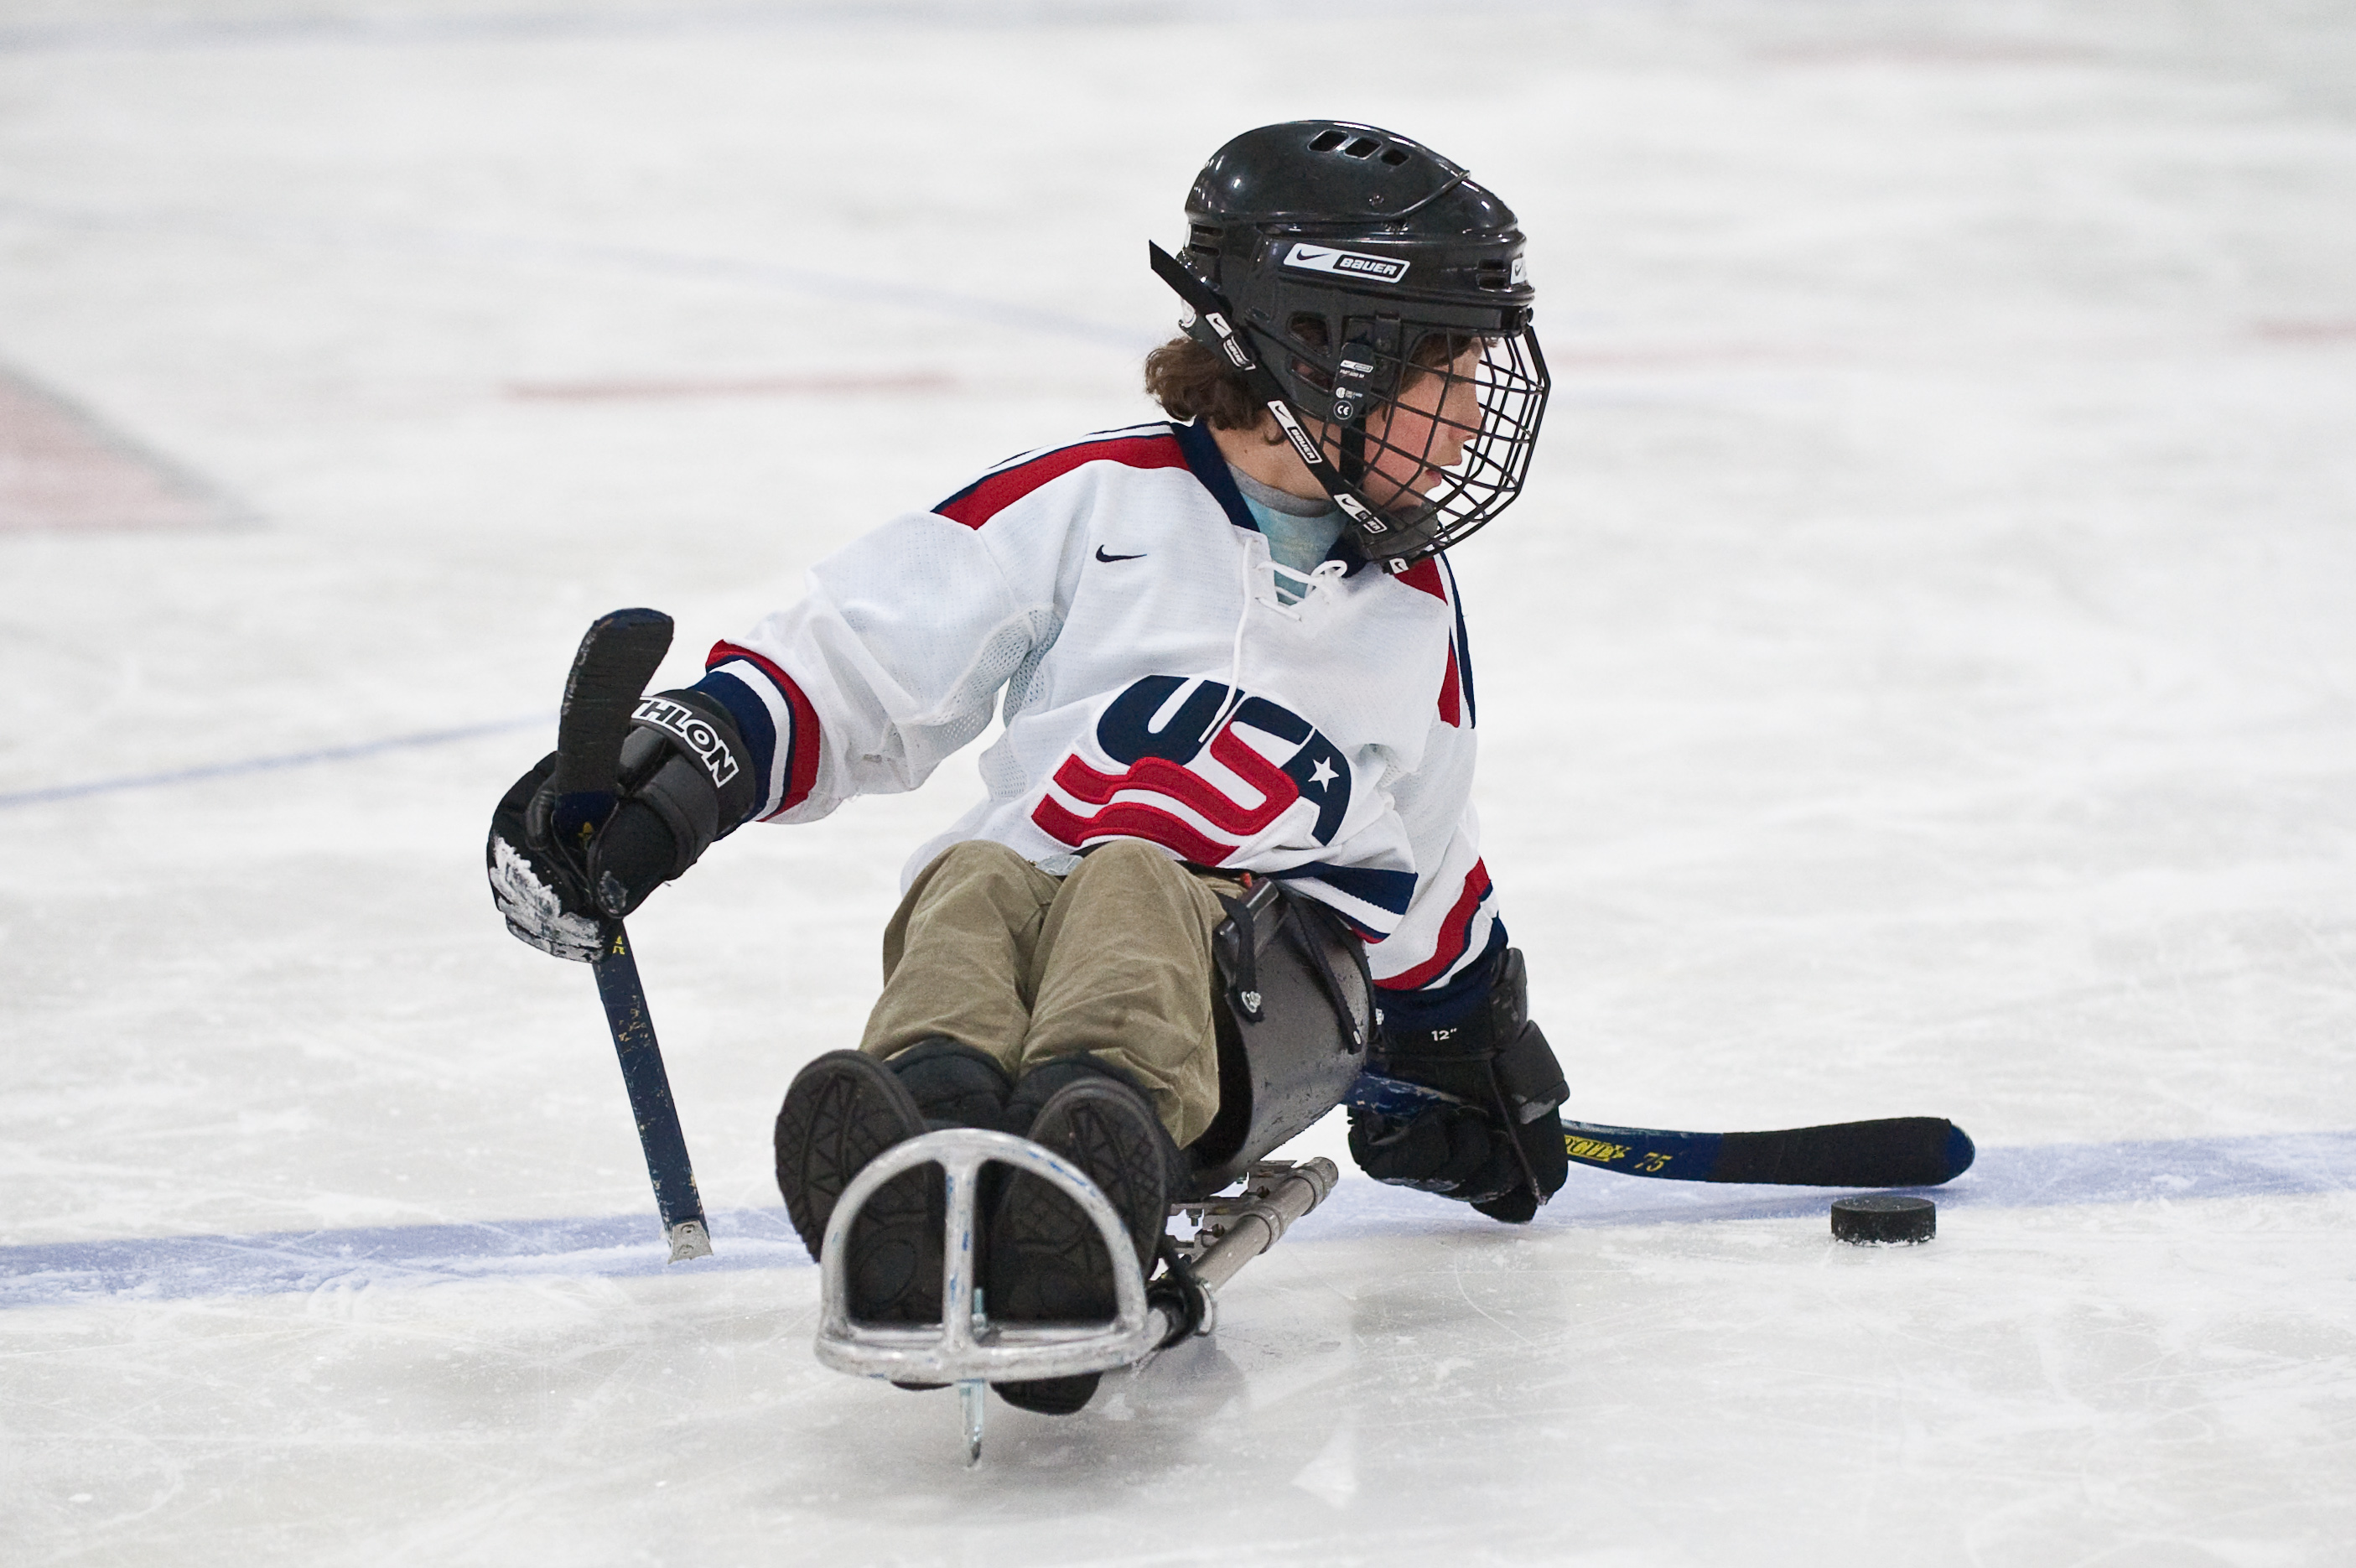 Try It Clinic! Sled Hockey - Rochester Accessible Adventures